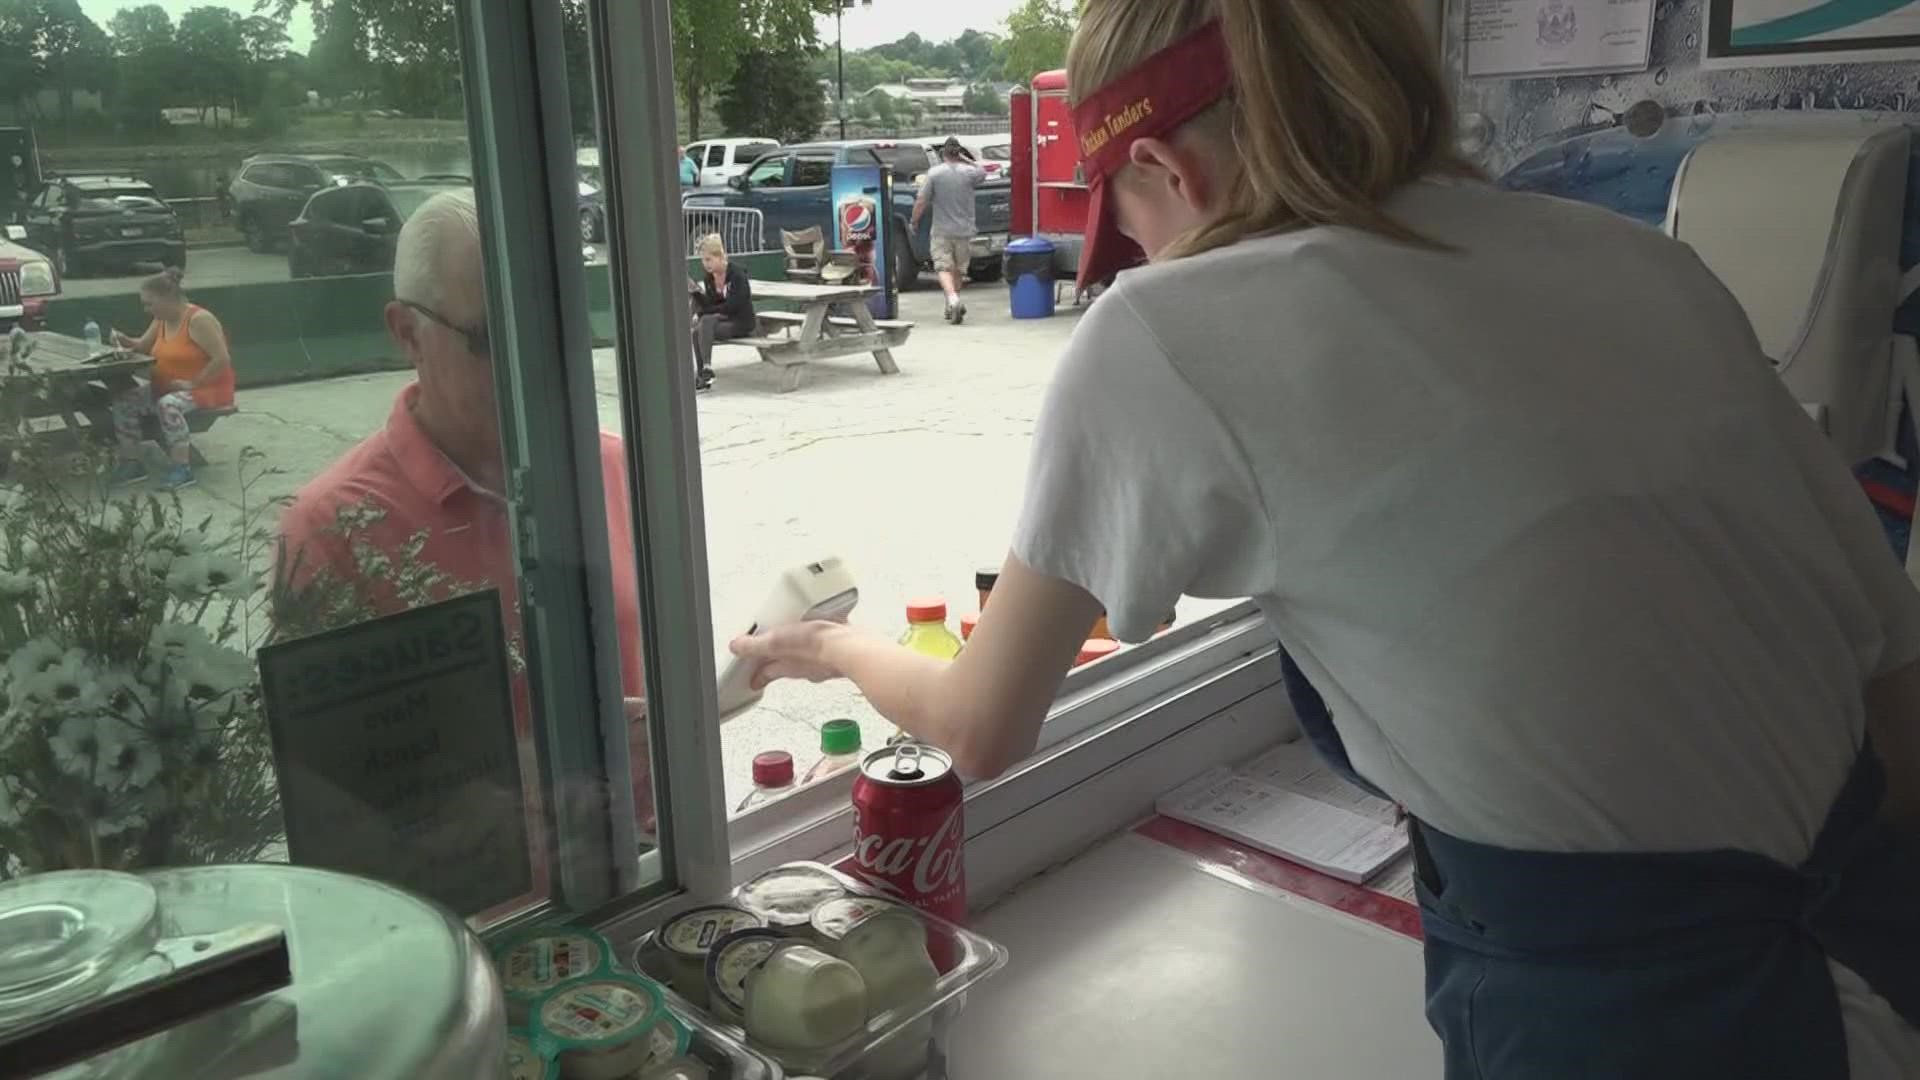 Inflation is impacting food truck vendors as costs increase.